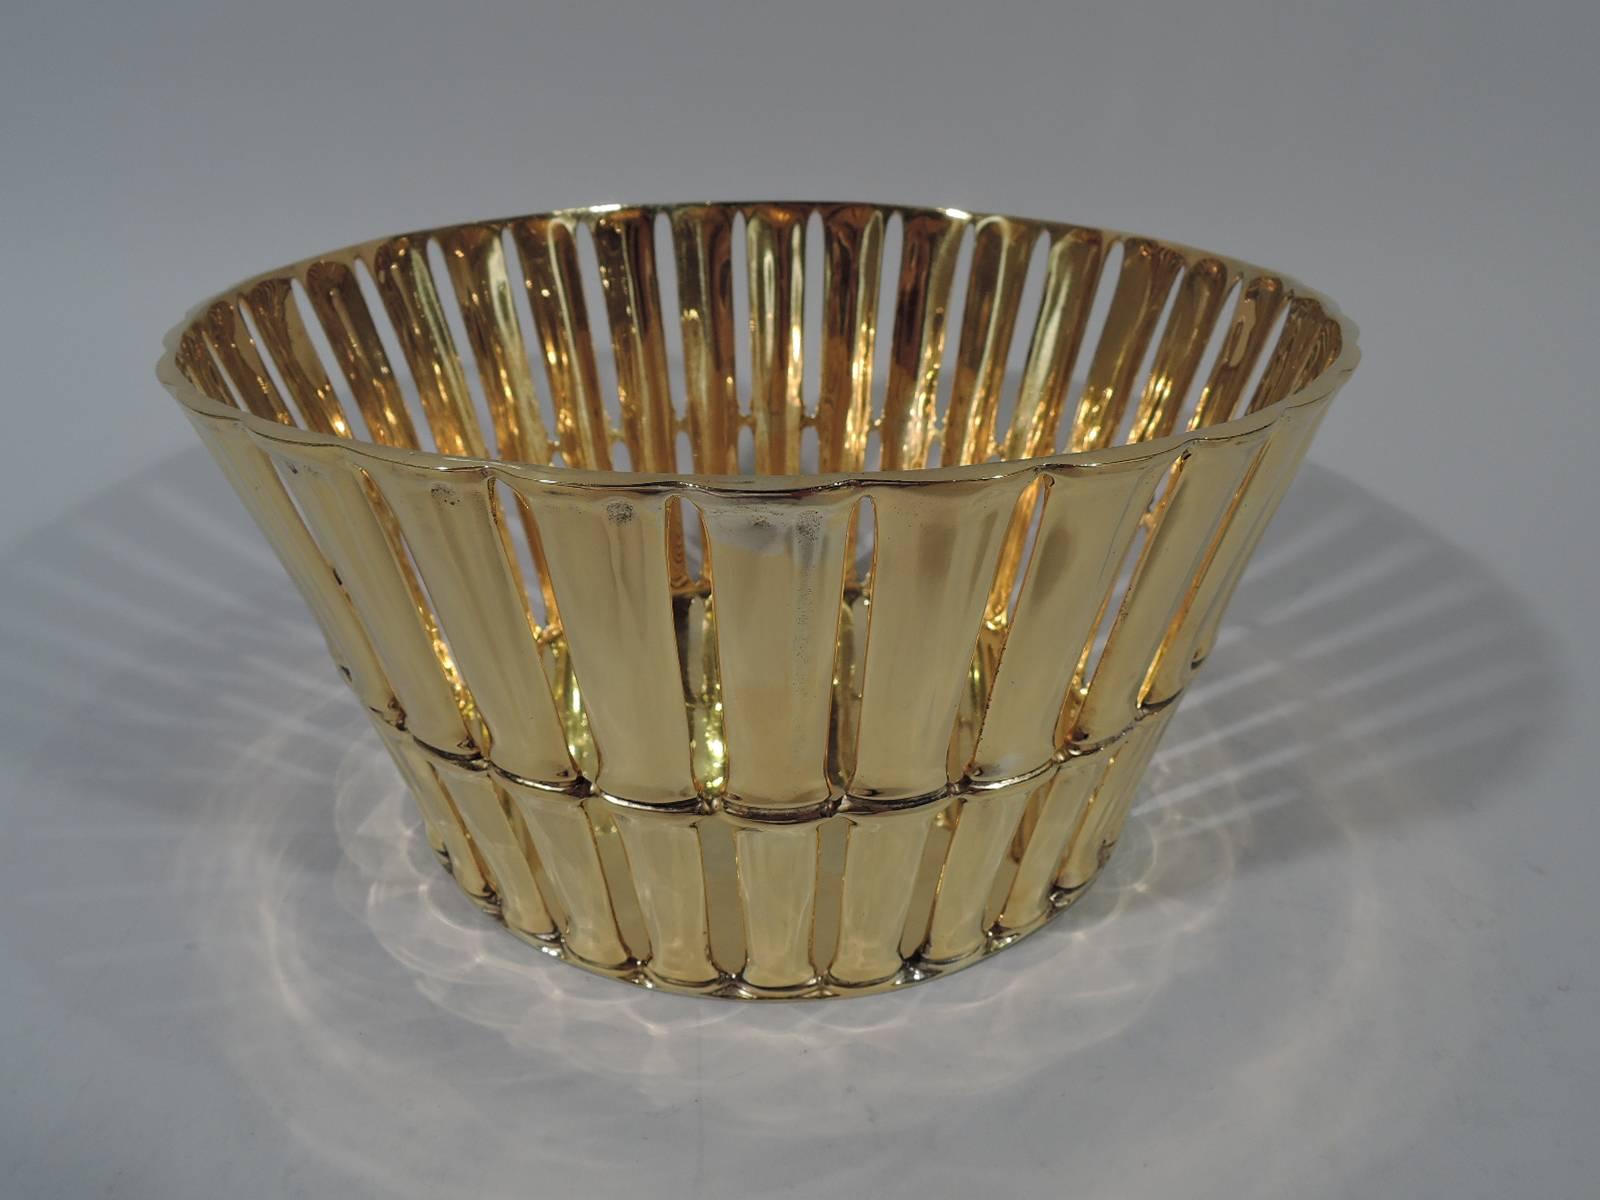 Gilt sterling silver basket in bamboo pattern. Made by Tiffany & Co. in New York. Solid well with open sides in form of bamboo stalks. A great Midcentury example of Tiffany’s ongoing interpretation of Asian motifs. With gilt metal liner. Hallmark